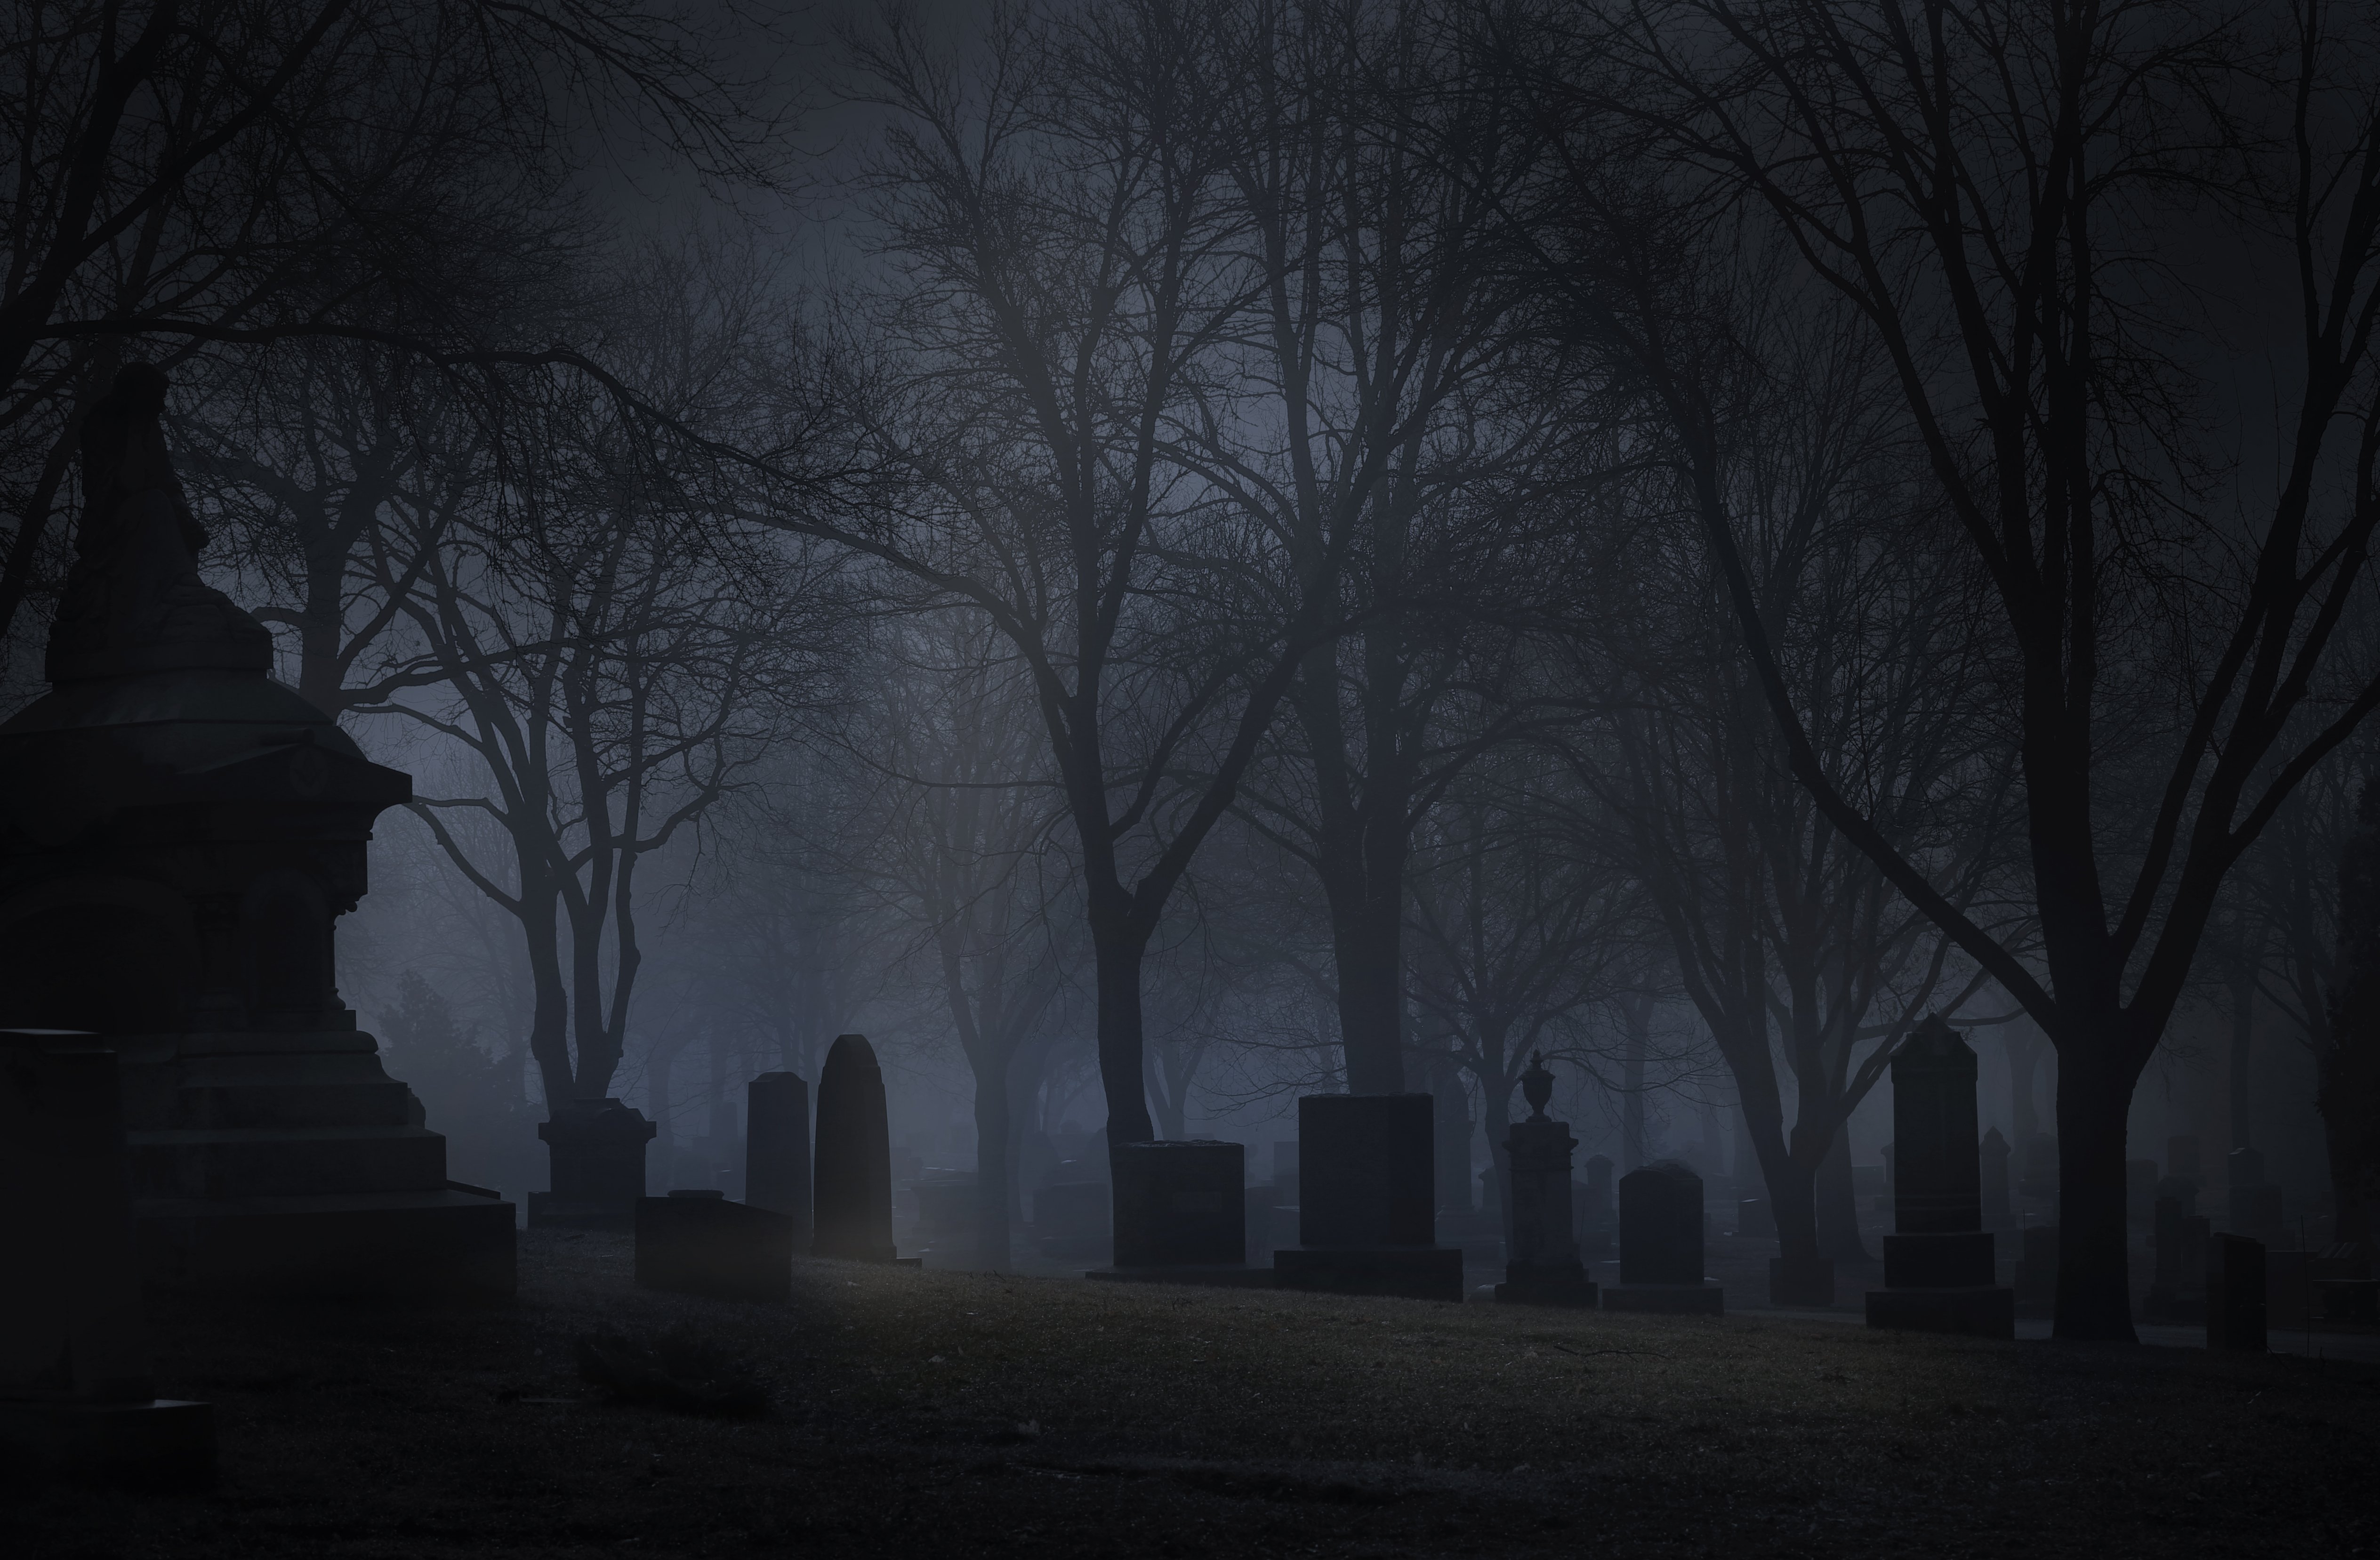 The Haunted Bachelor's Grove Cemetery